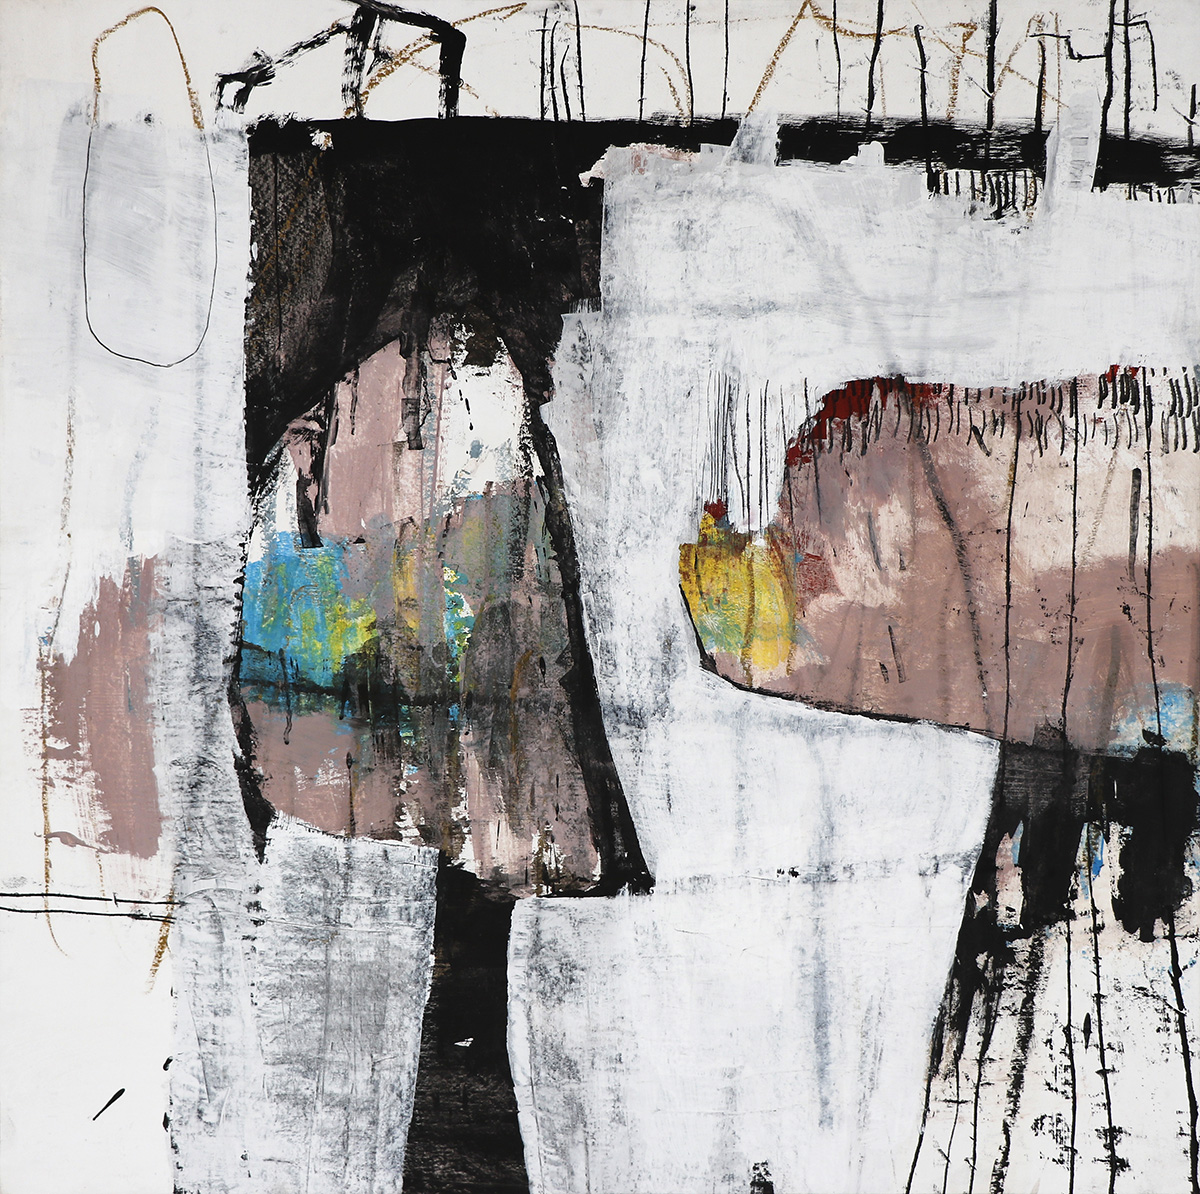 Begegnung, 202297 x 97 x 4 cmMixed media on paper, on plywood